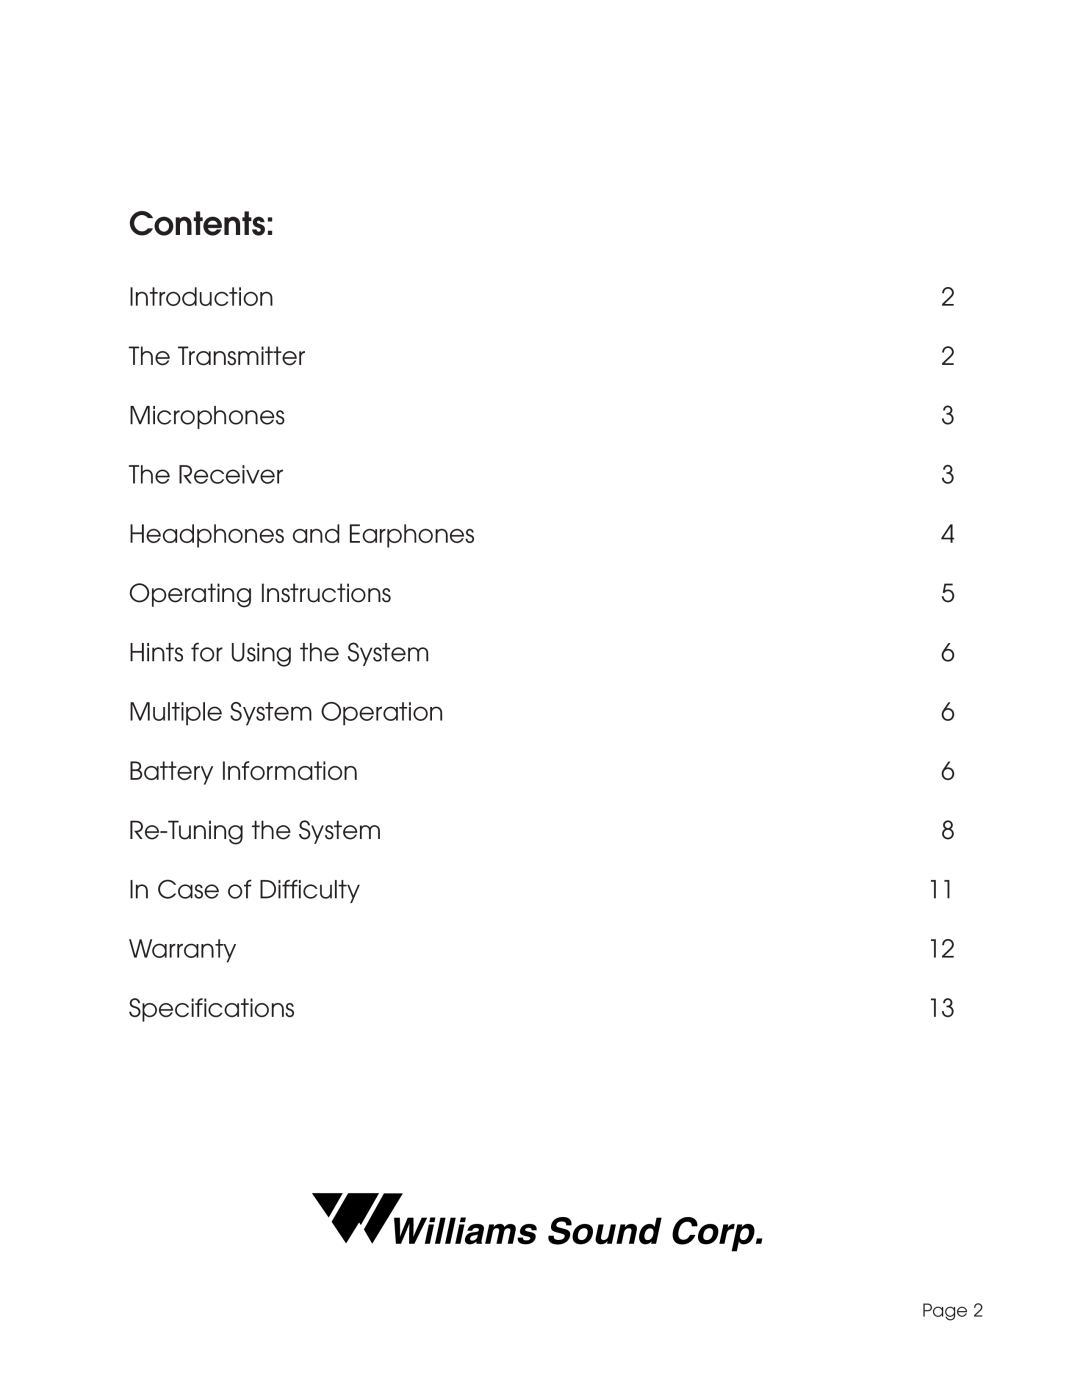 Williams Sound TGS SYS A manual Contents, Williams Sound Corp 